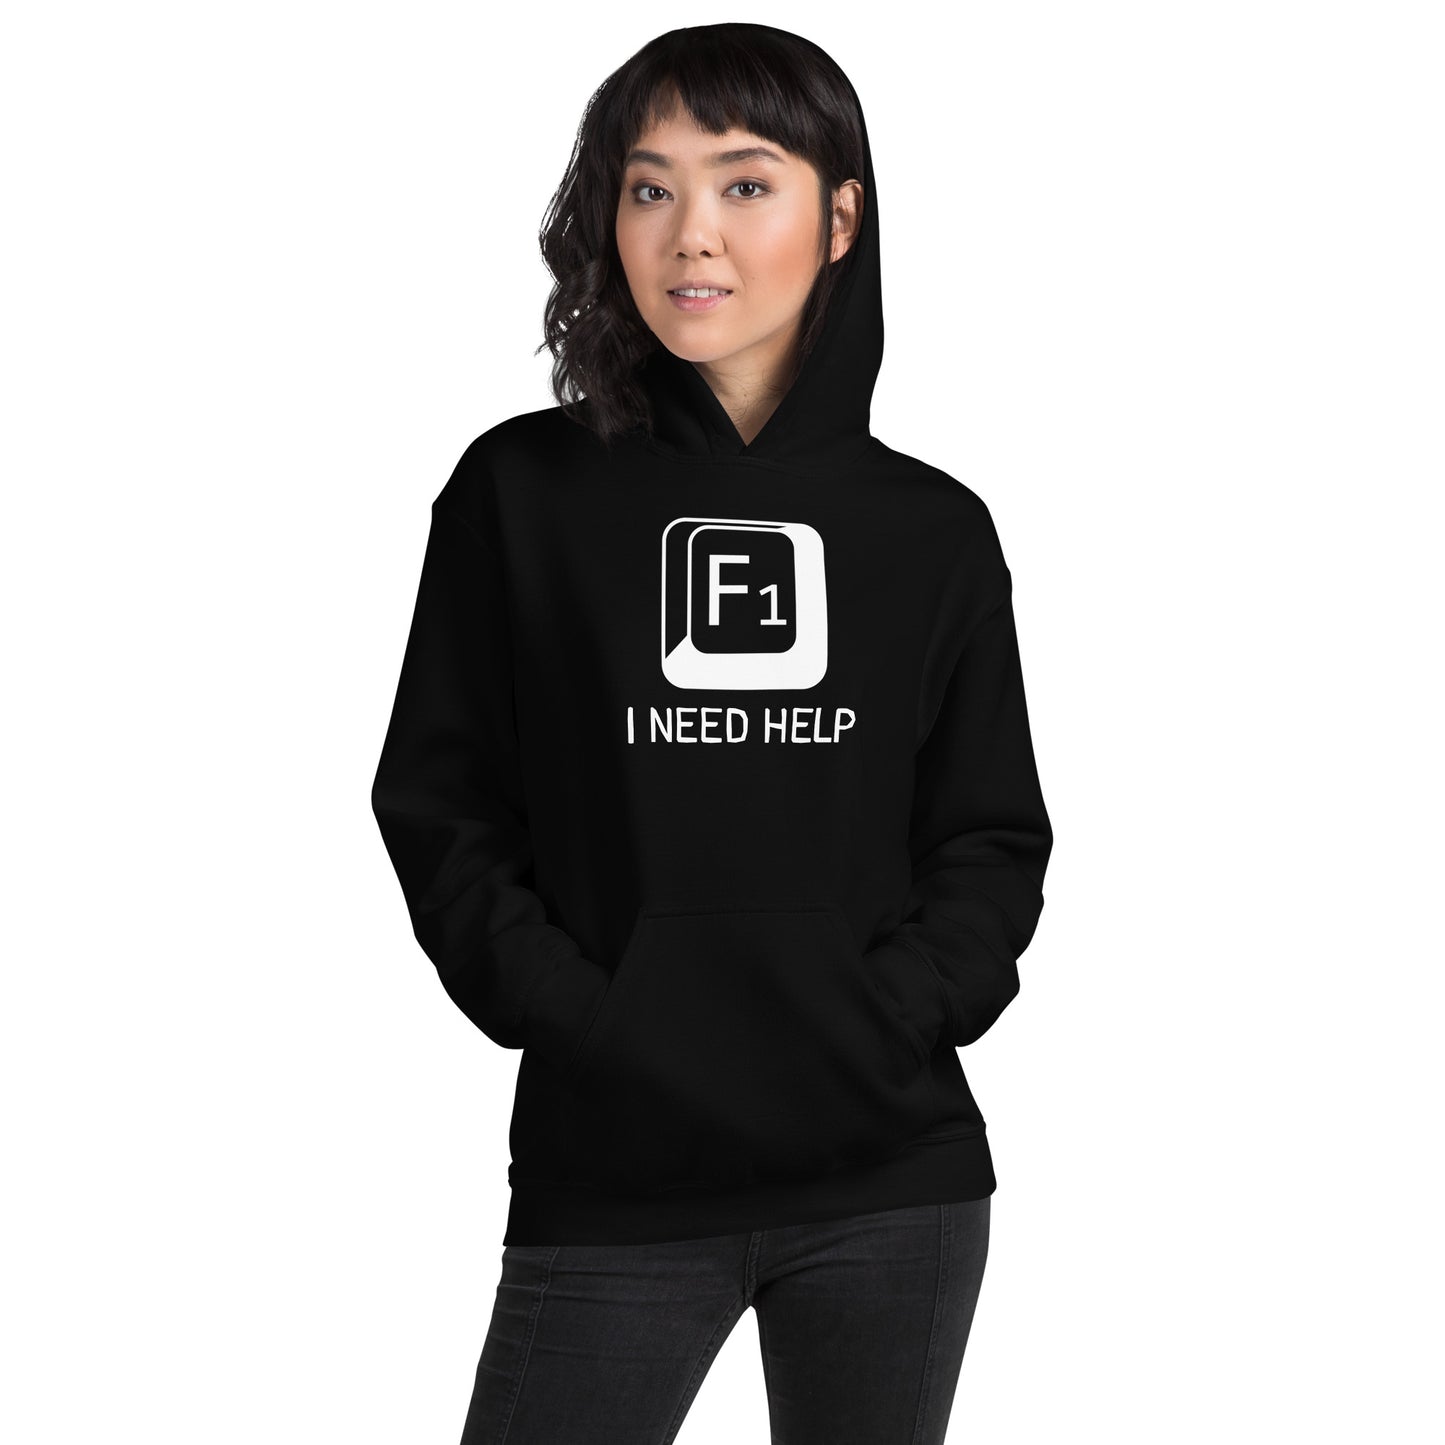 Women with black hoodie and a picture of F1 key with text "I need help"